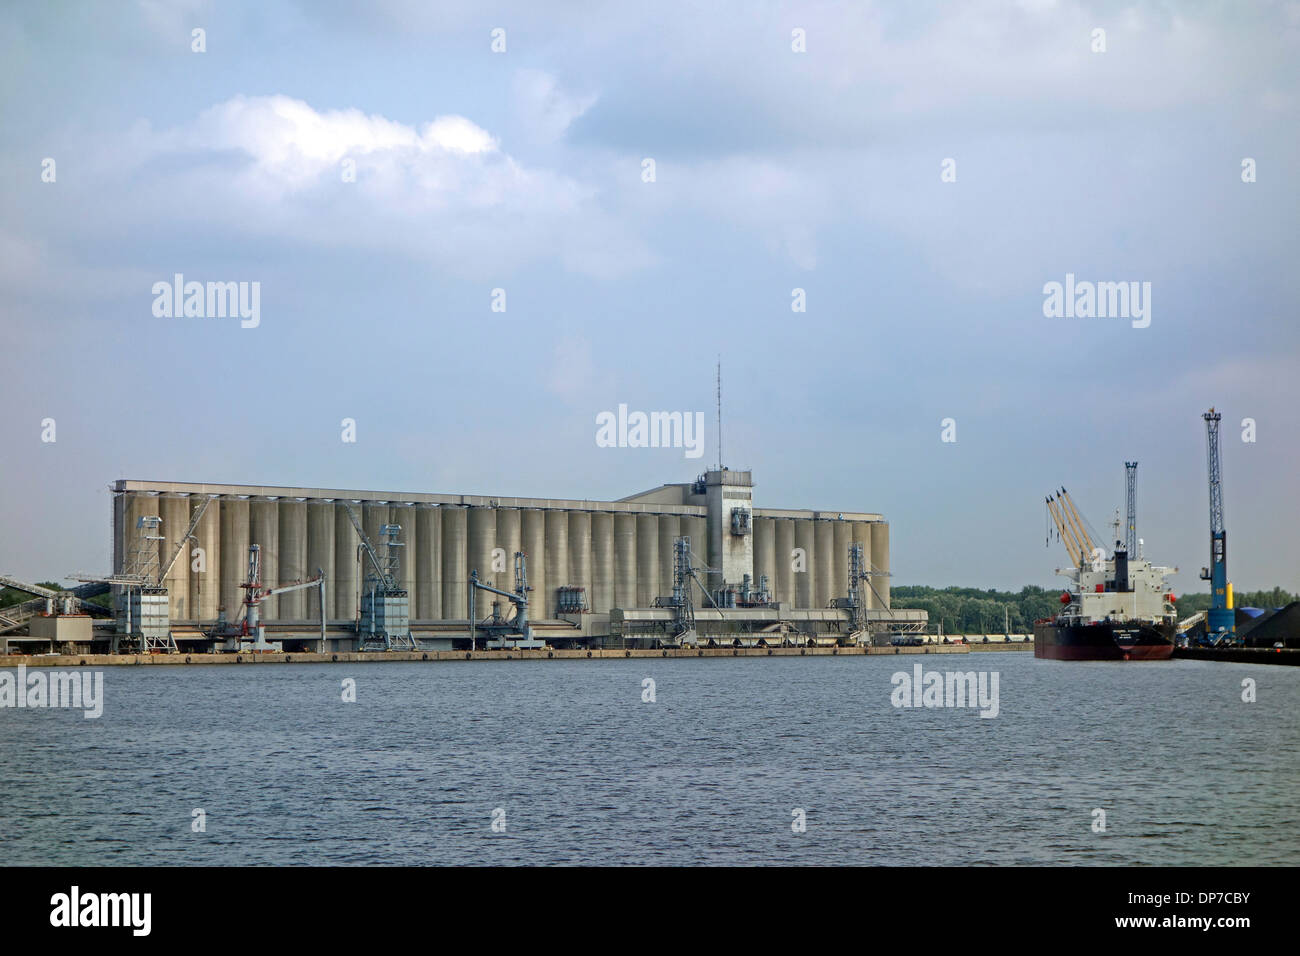 Euro-Silo, maritime terminals for handling and storage of grains, oilseeds and derivatives, port of Ghent, Flanders, Belgium Stock Photo